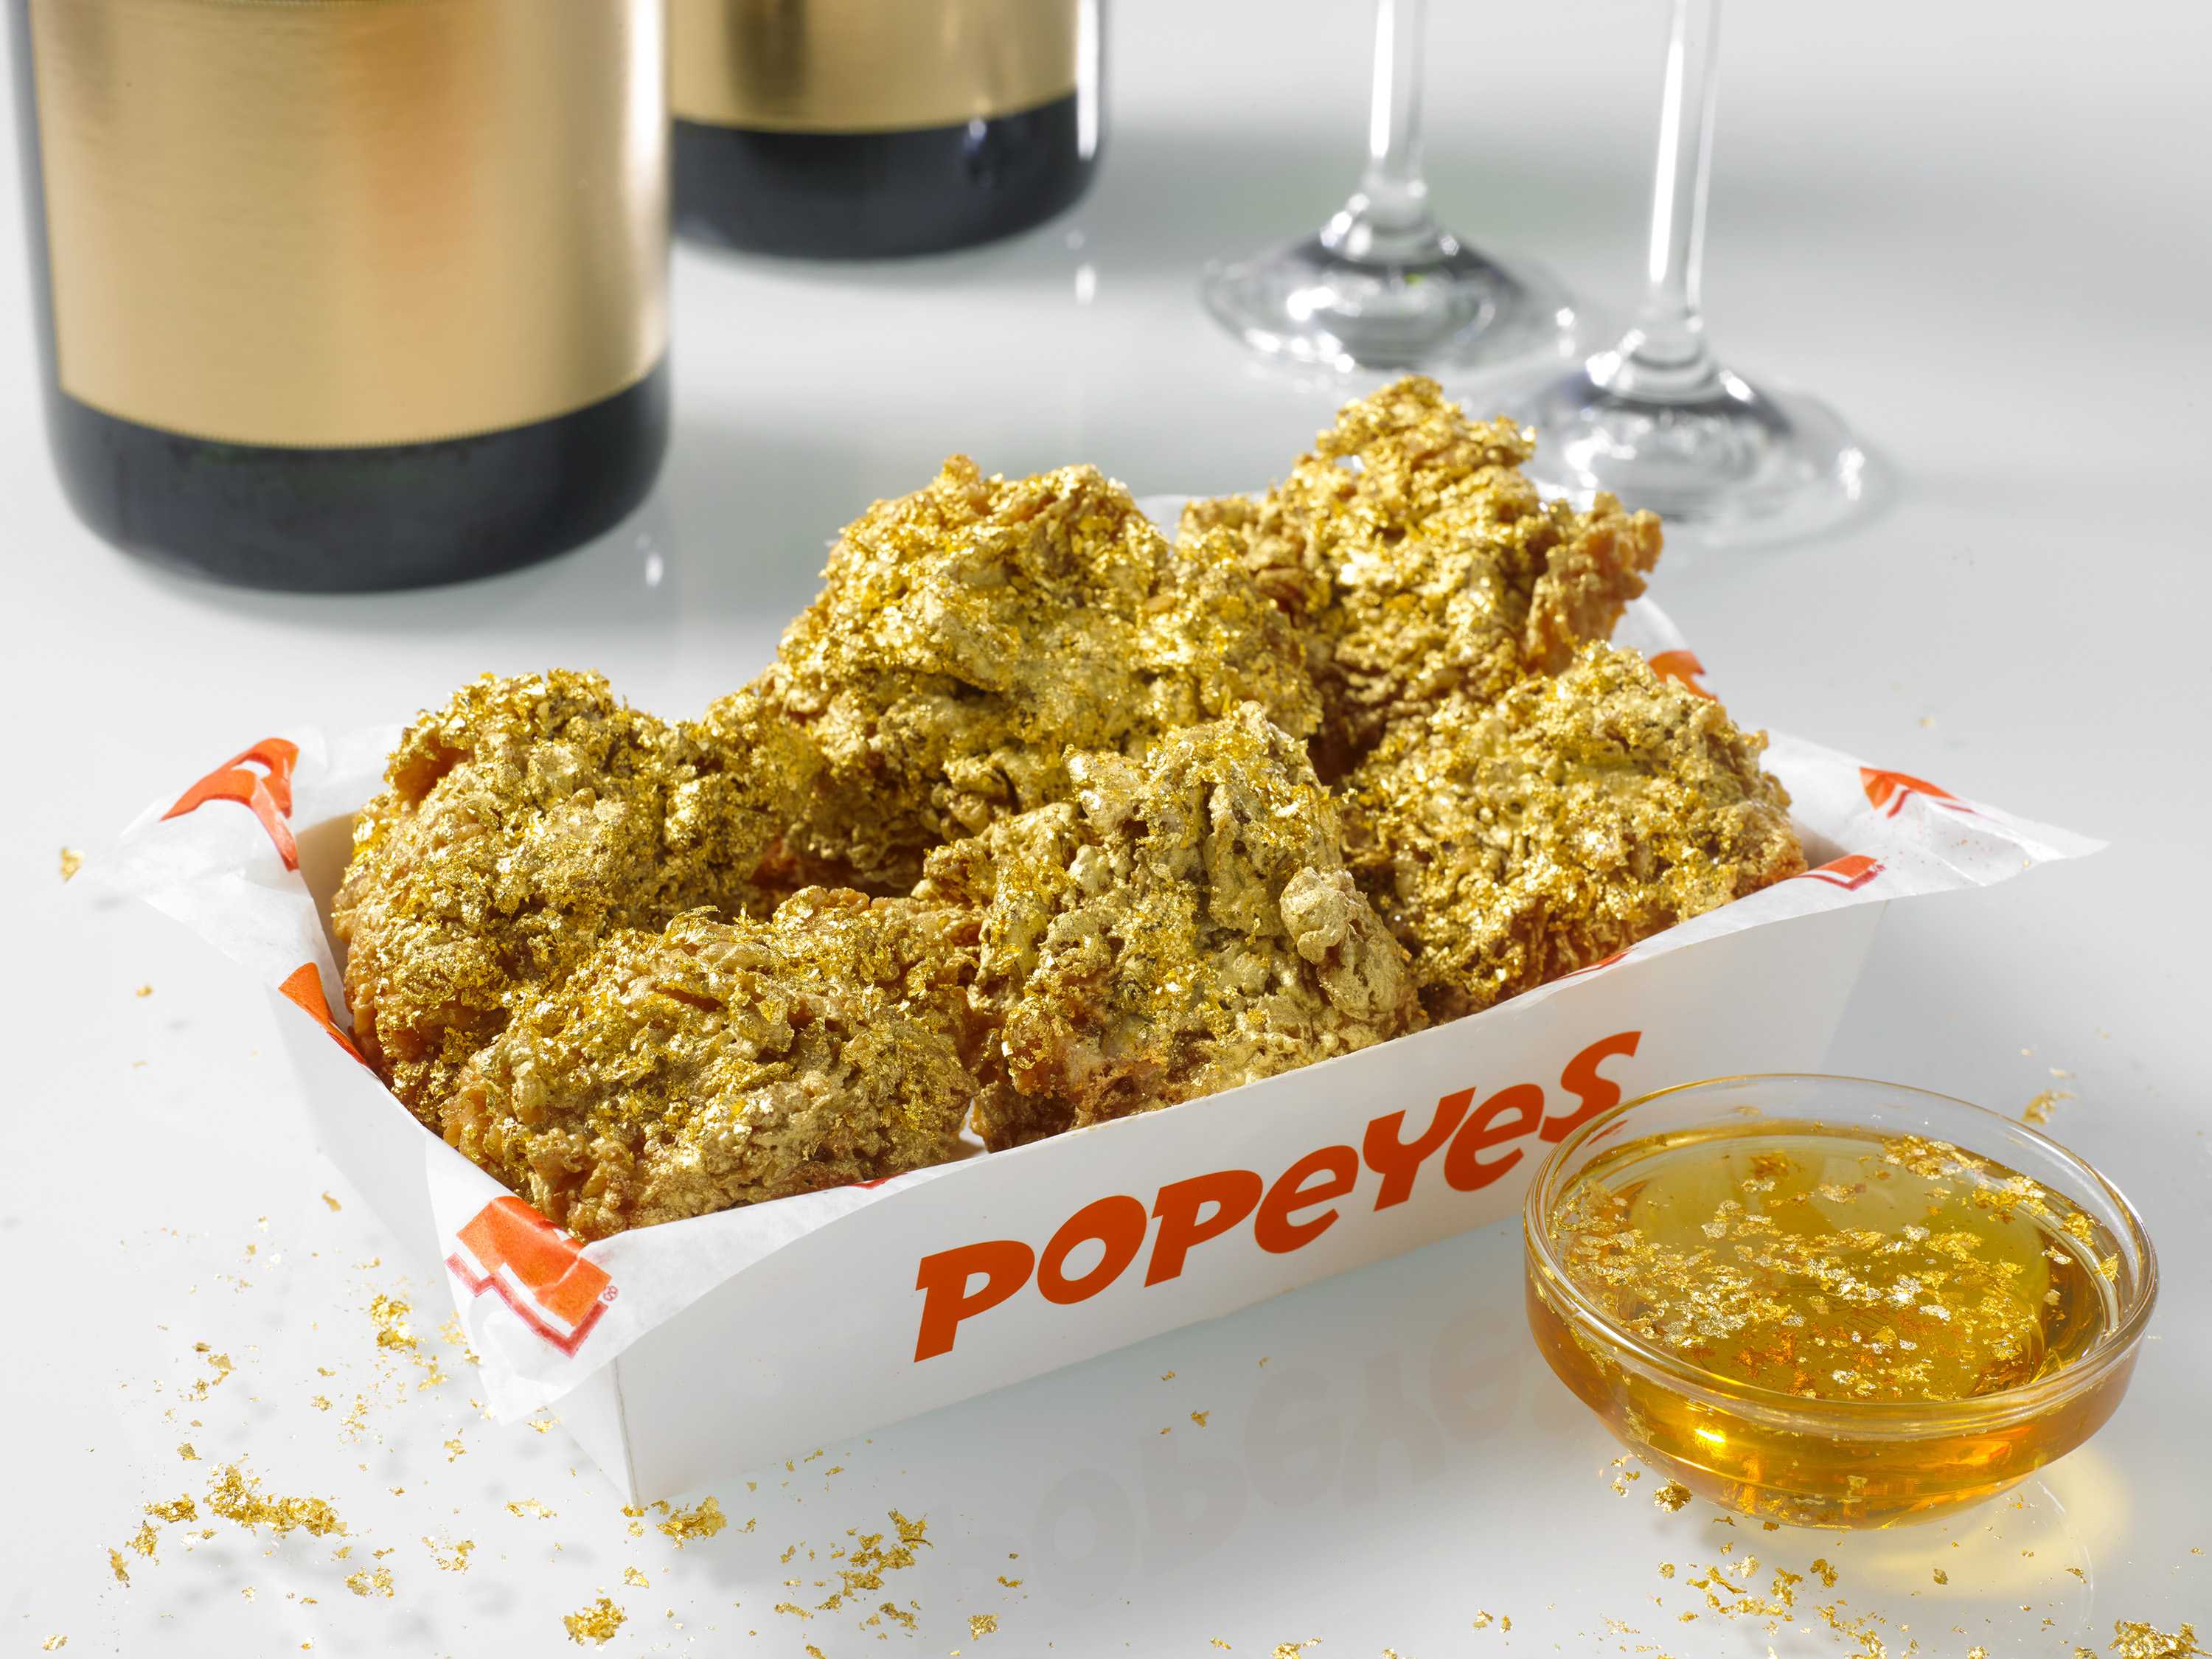 chicken nuggets from popeyes